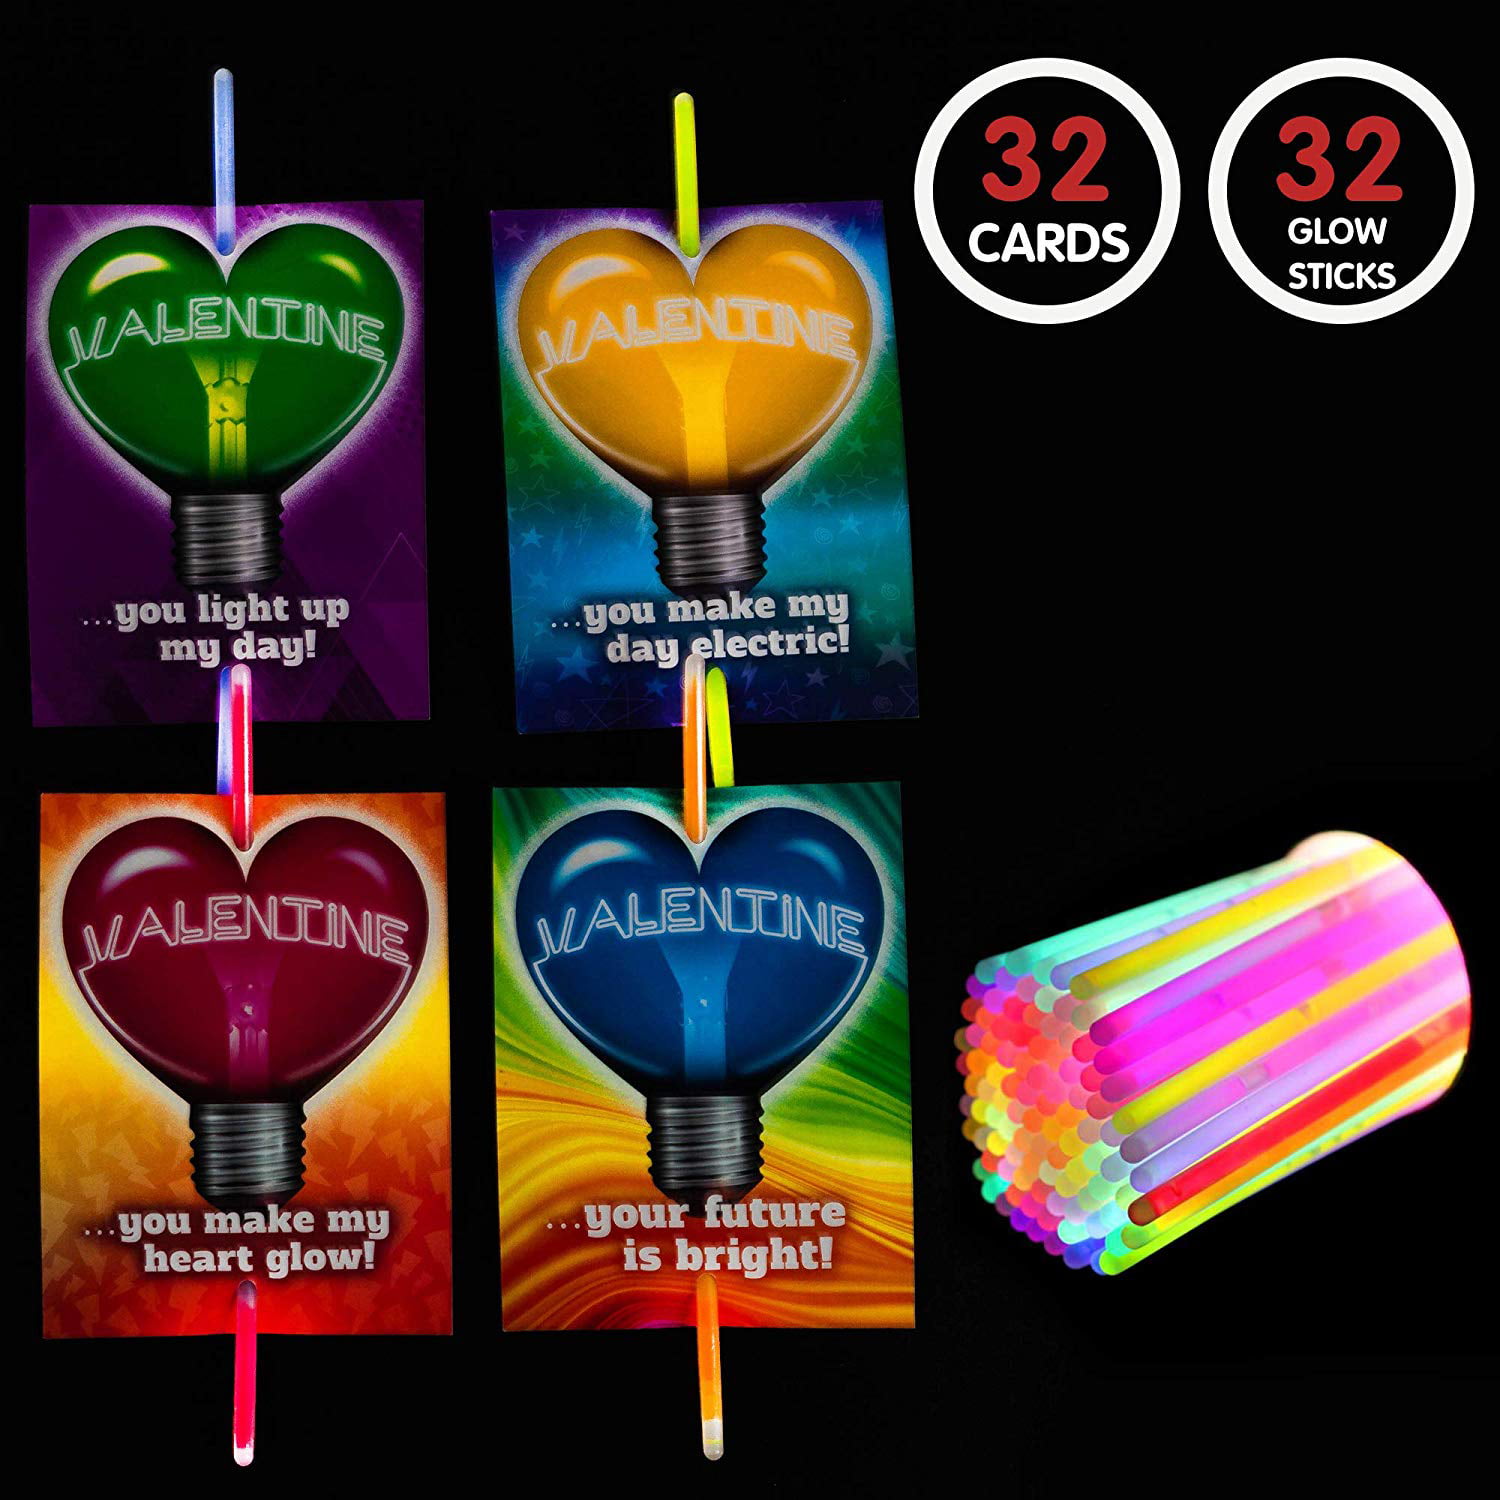 Cute Bulk Goodies Fillers for Preschool Activities Boys Girls Age 3+ Years Old School Classroom Exchange Greeting Card Class Party Favors Toys Toddler Valentines Gifts Glow in the Dark 26PCS Kids Valentines Day Cards with Light Up Flashing Ring